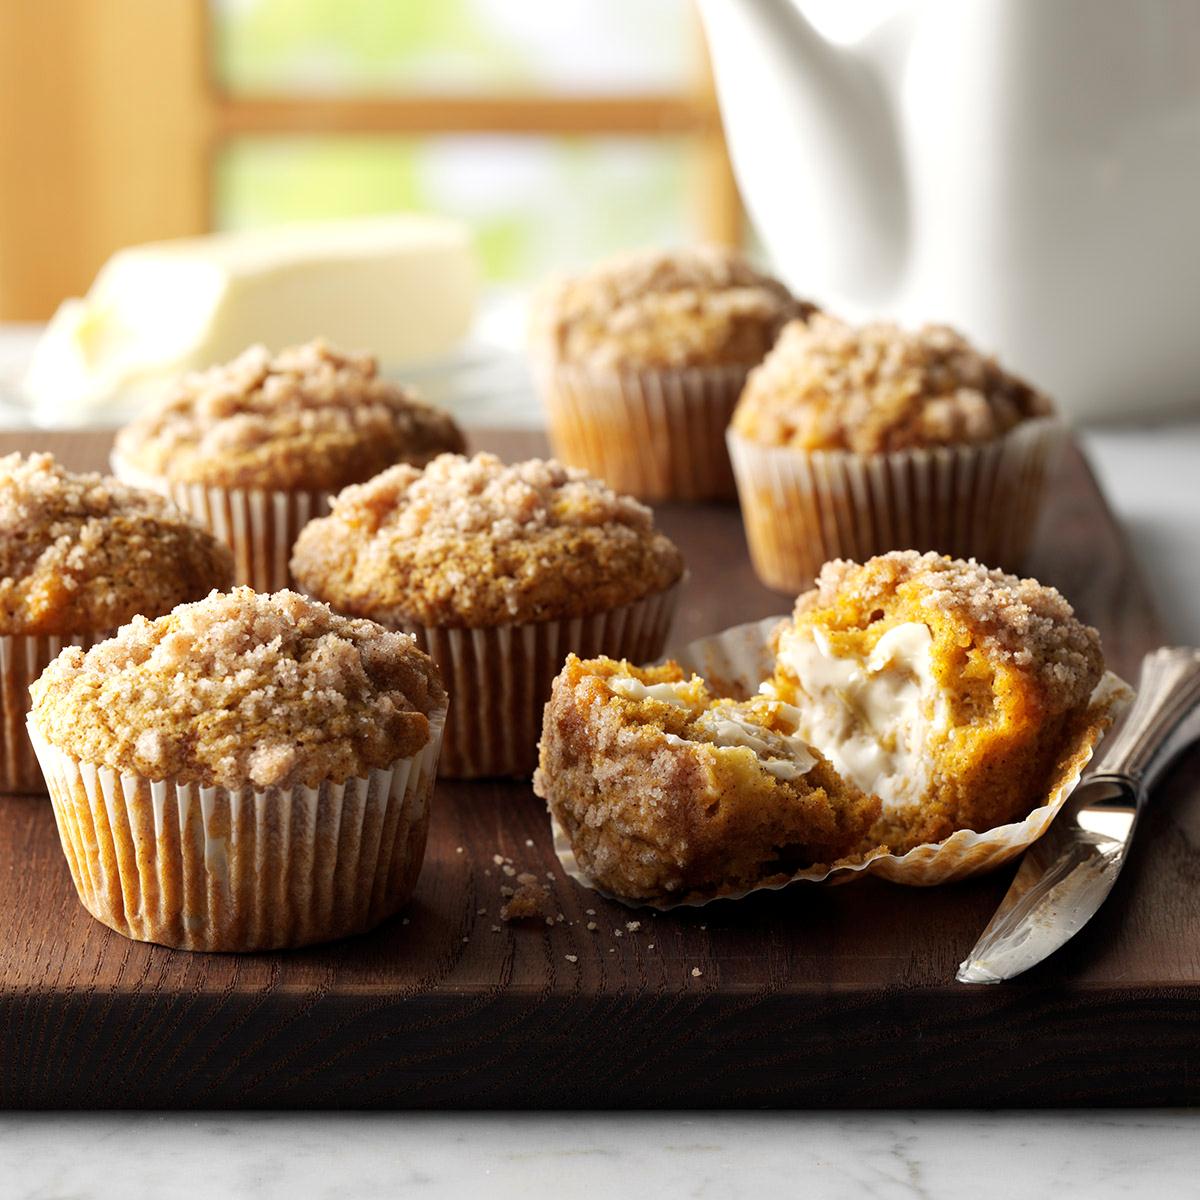 PumpkinApple Muffins with Streusel Topping Recipe Taste